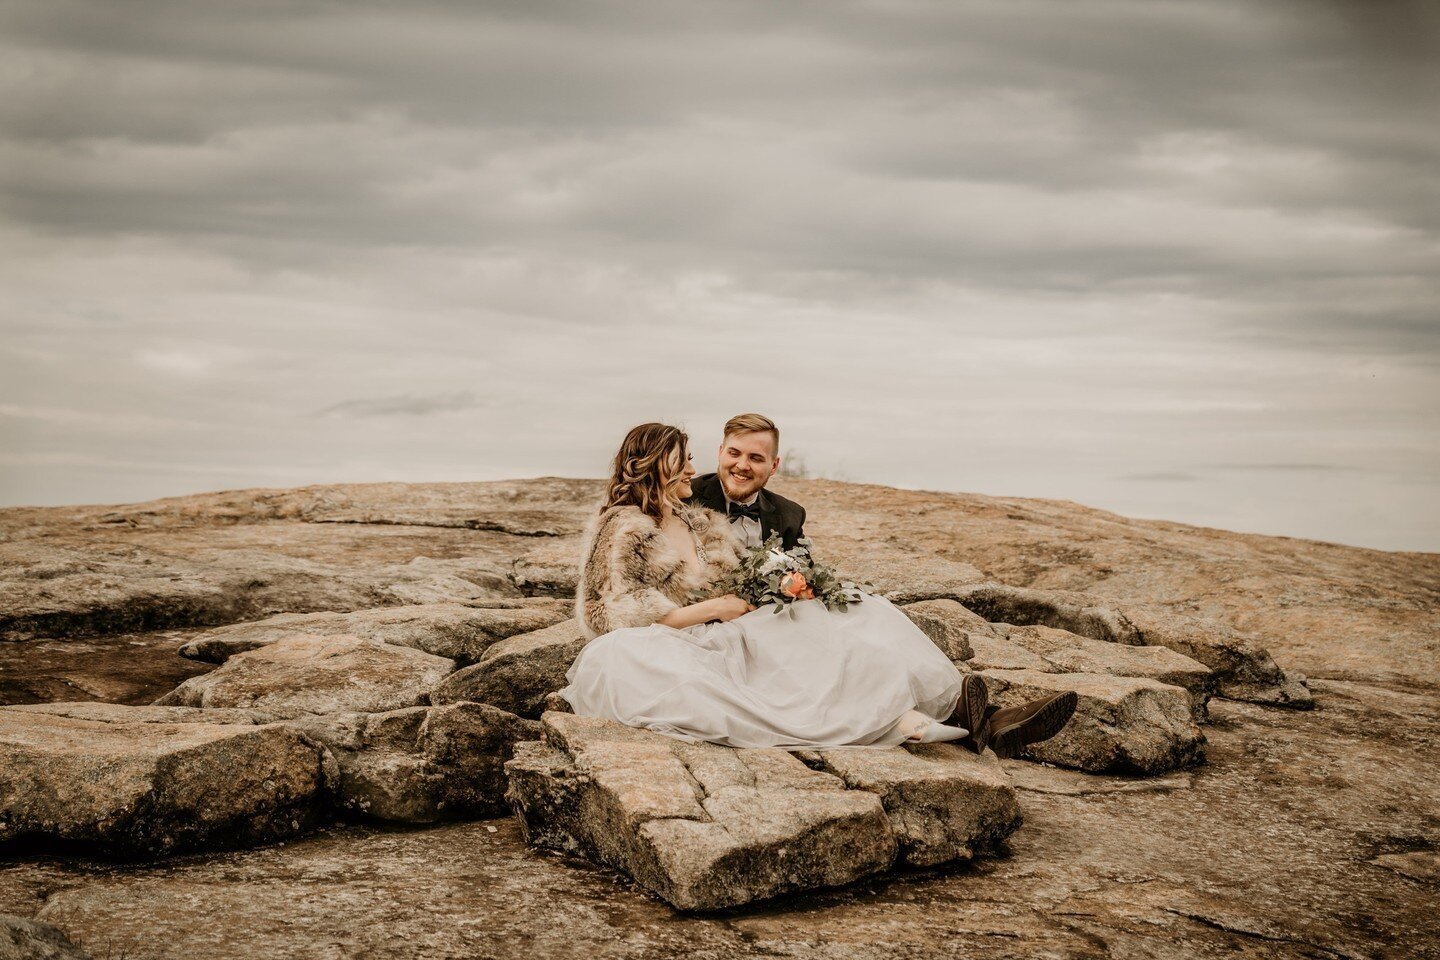 A wedding on a mountain top?!?! Count me in. 😎⁠
⁠
#nashvilleweddingphotographers #nashvilleweddingphotography #nashvilleelopement #love #wedding #elope #nashvillephotographer #franklintennessee #elopenashville #elopementphotographer #elipement #elop